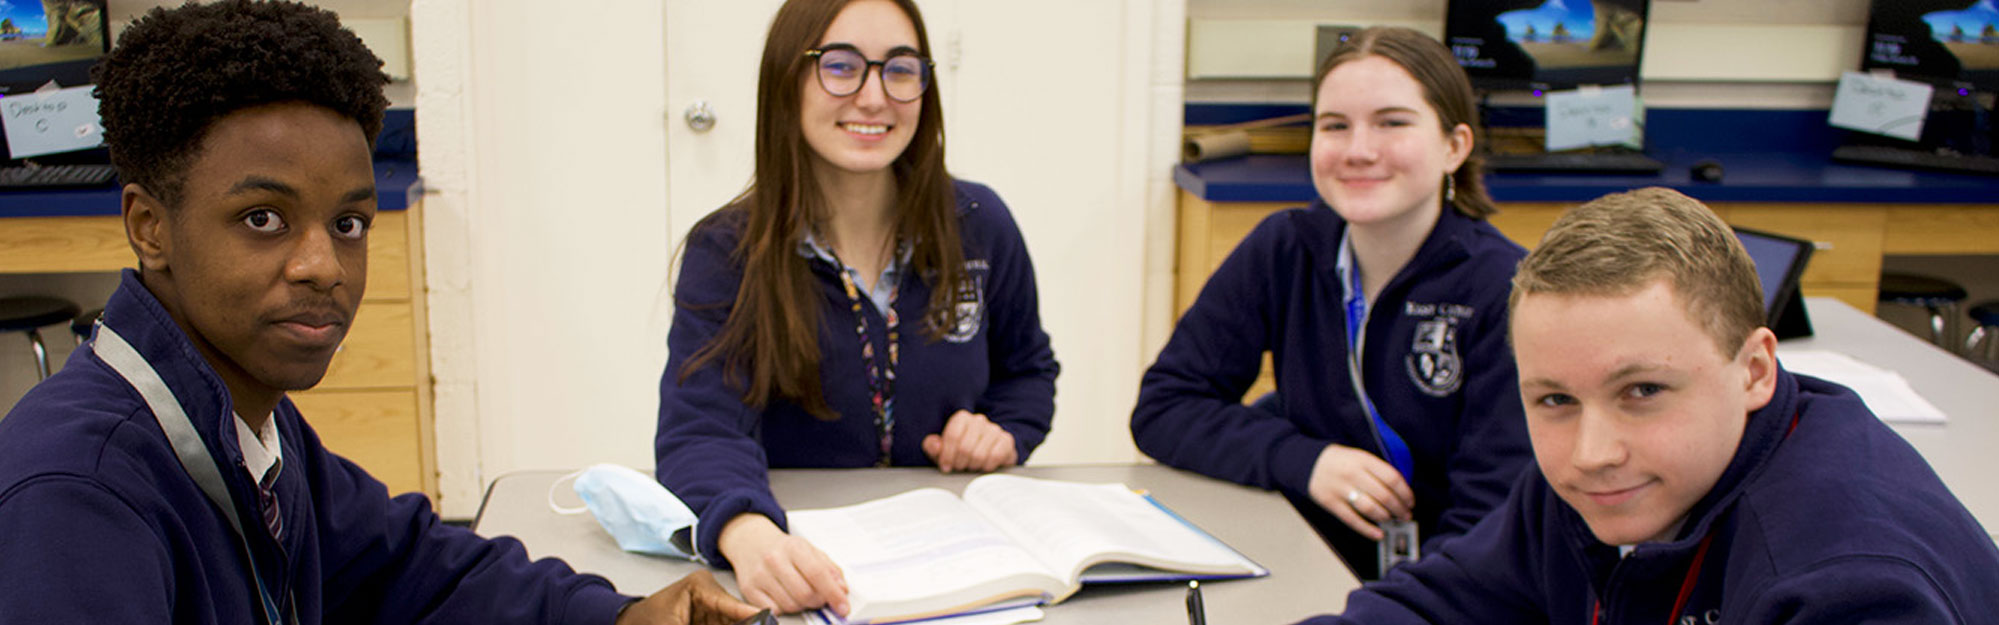 Four happy students sitting at a table together - East Catholic Fall Open House - Thursday, October 6 at 6:30 p.m.